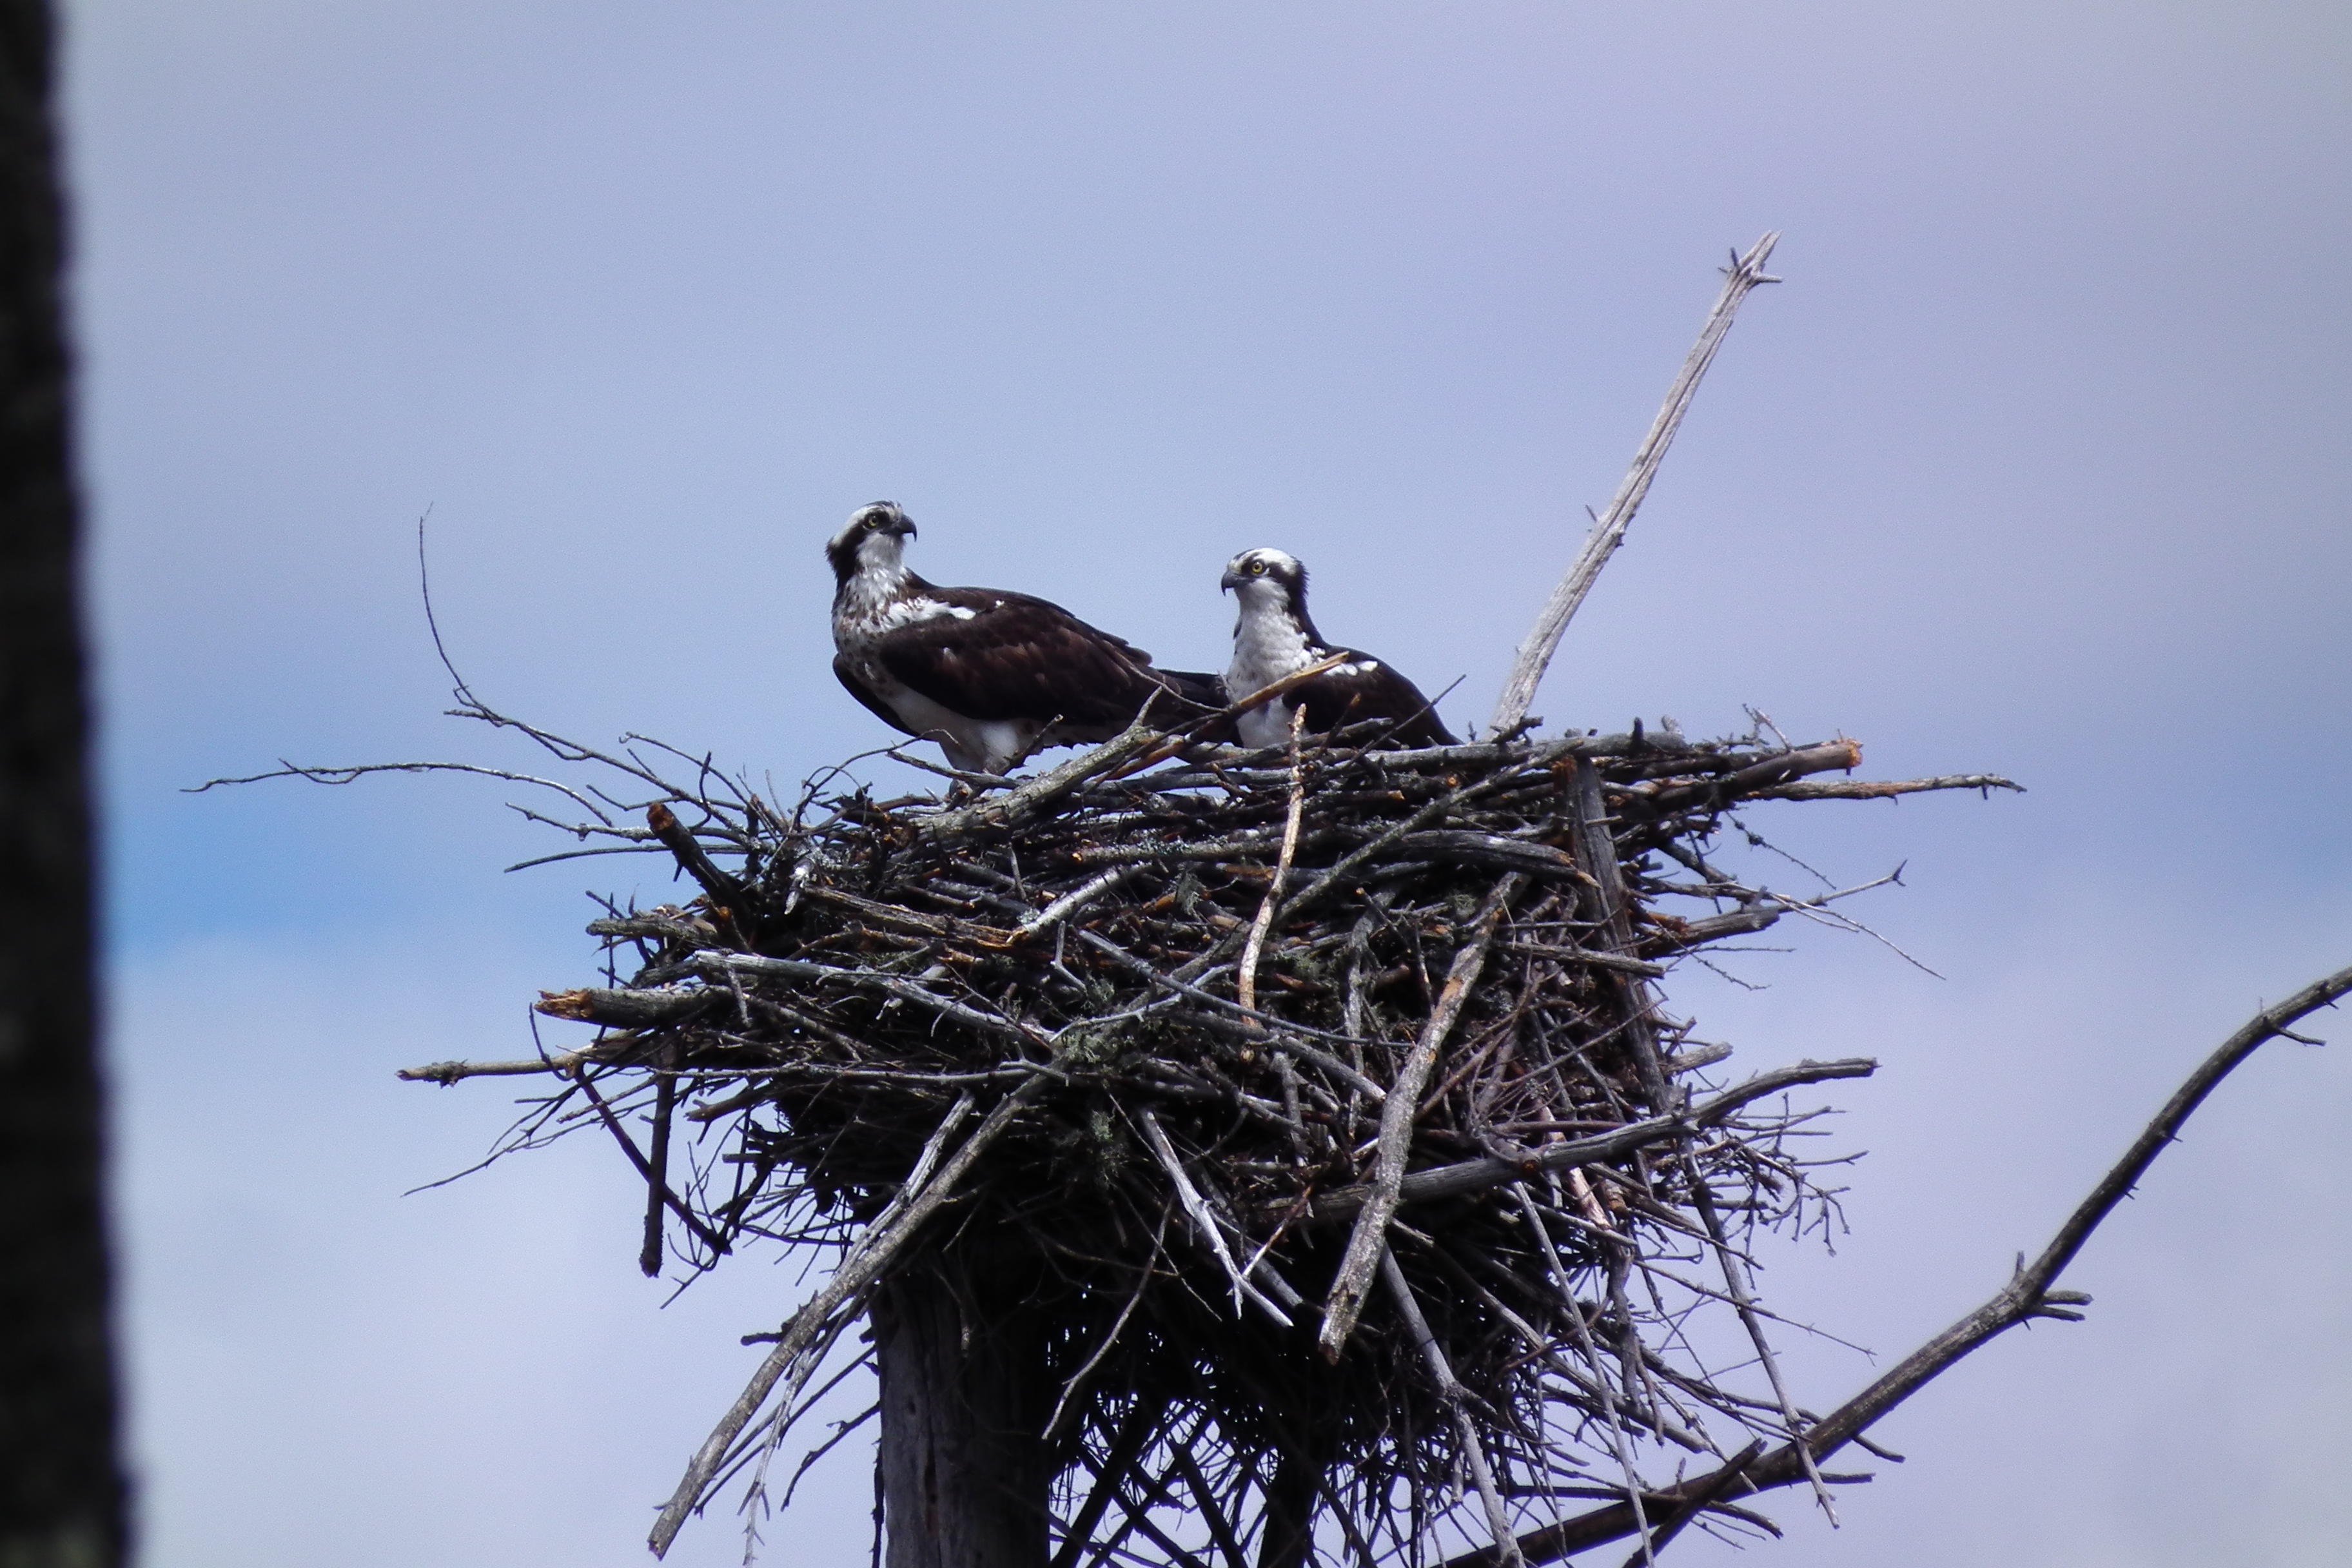 Amy's Park is home to at least one family of Osprey